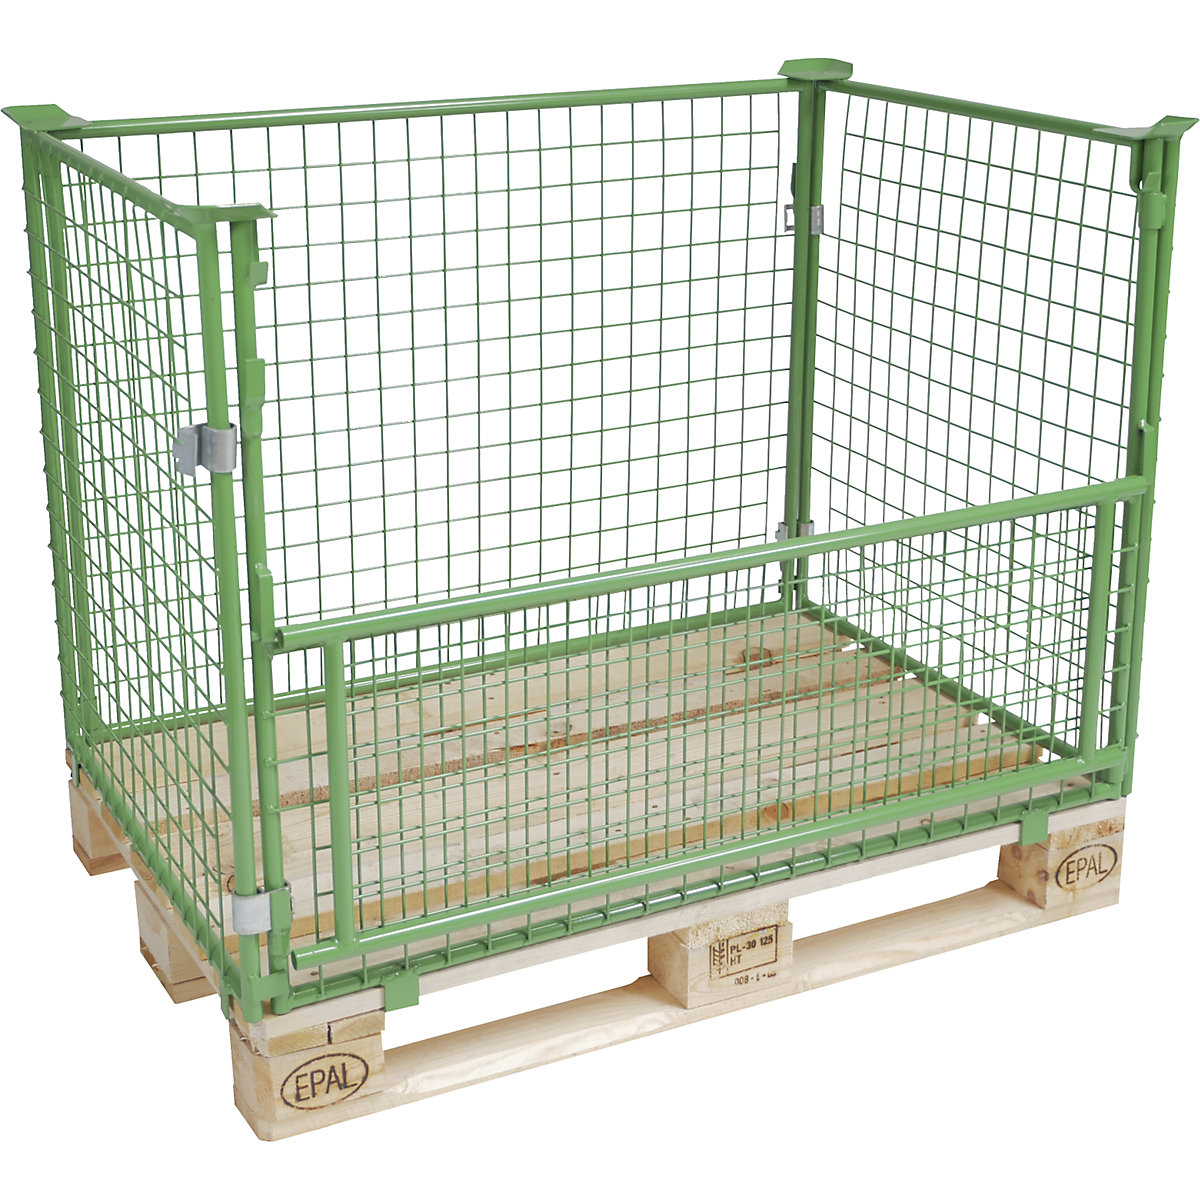 Mesh stacking frame for EUR pallet – eurokraft basic, with flap, mesh size 50 x 50 mm, height 1000 mm, green-1